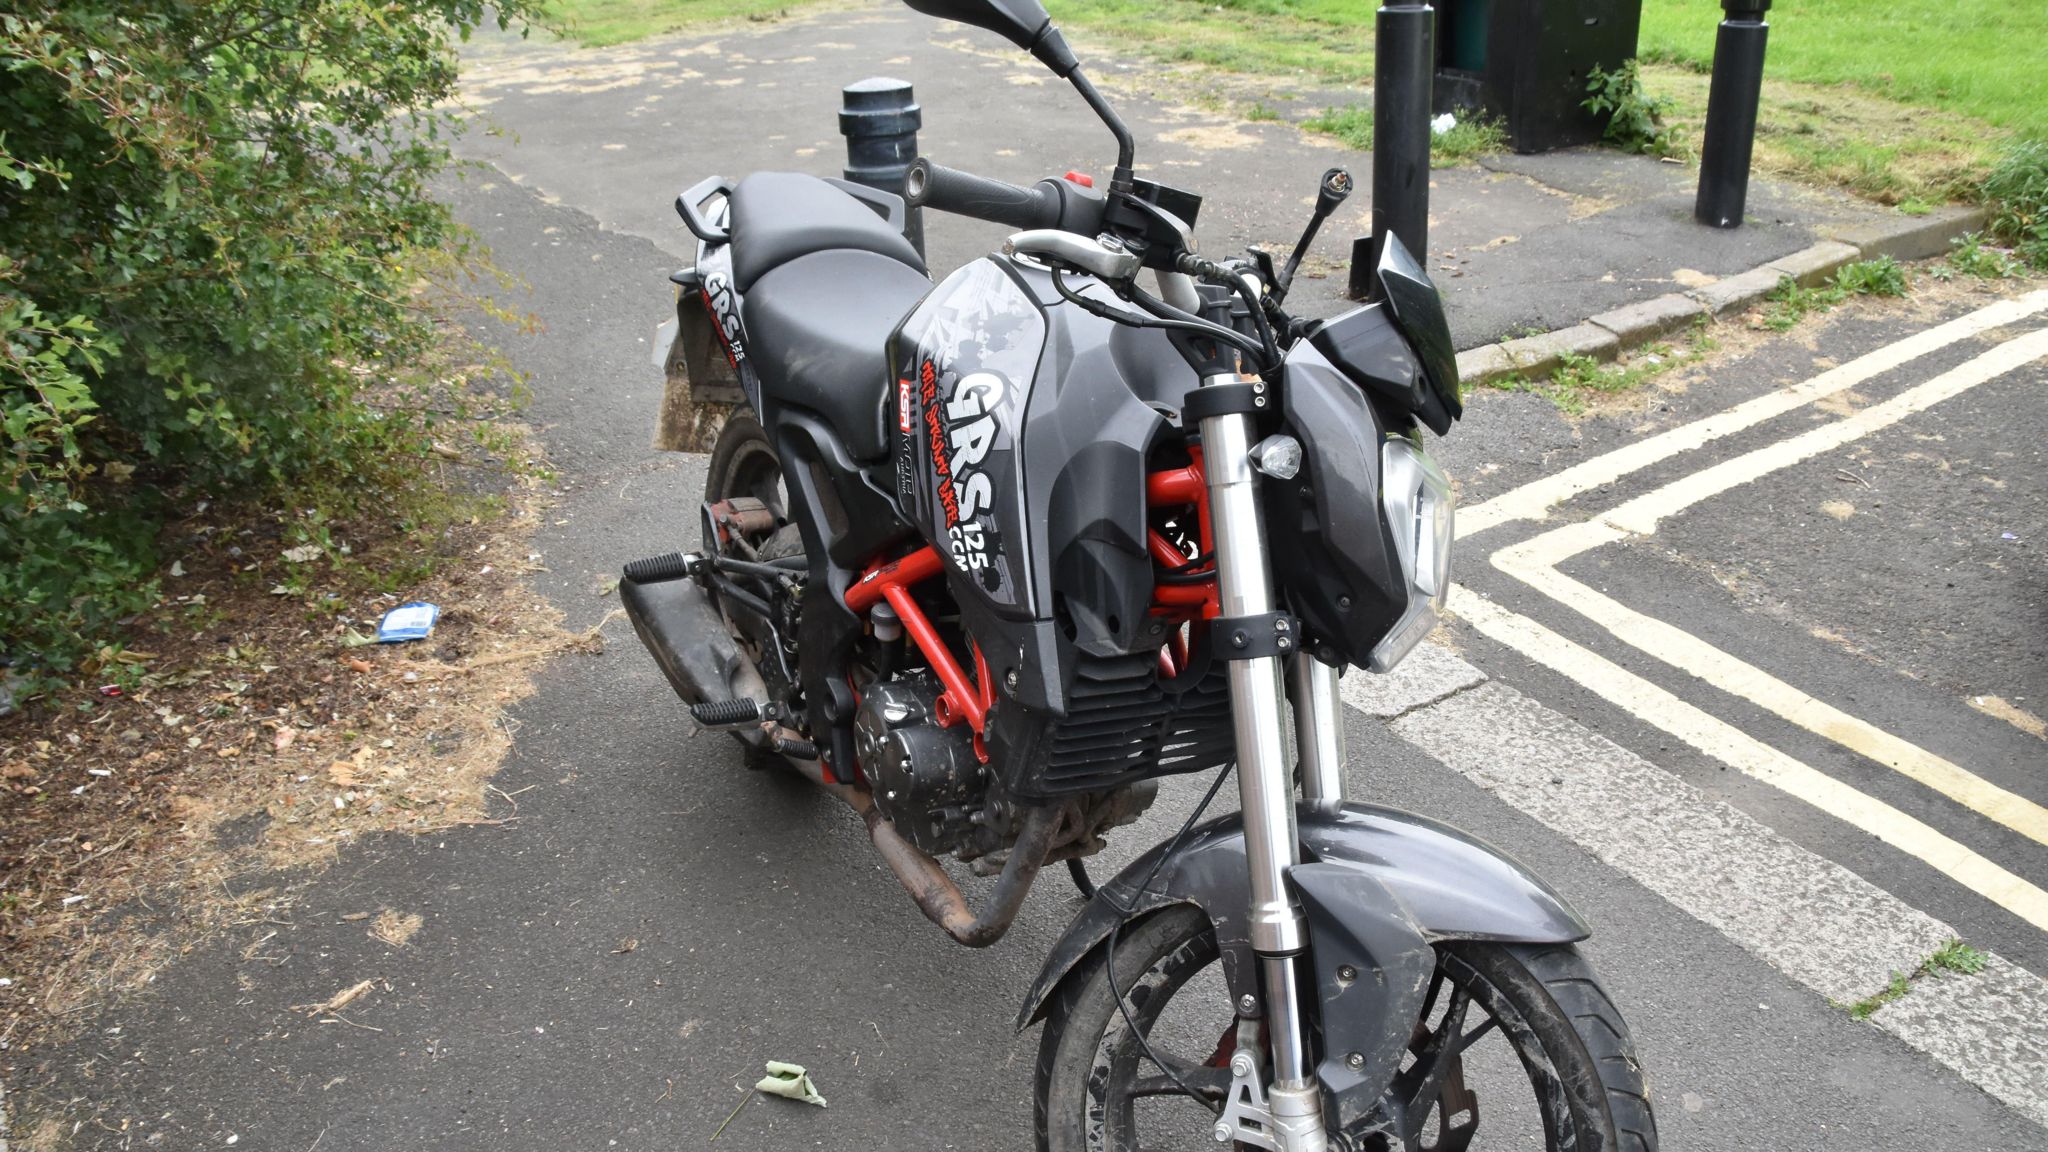 The stolen motorbike pictured from the front